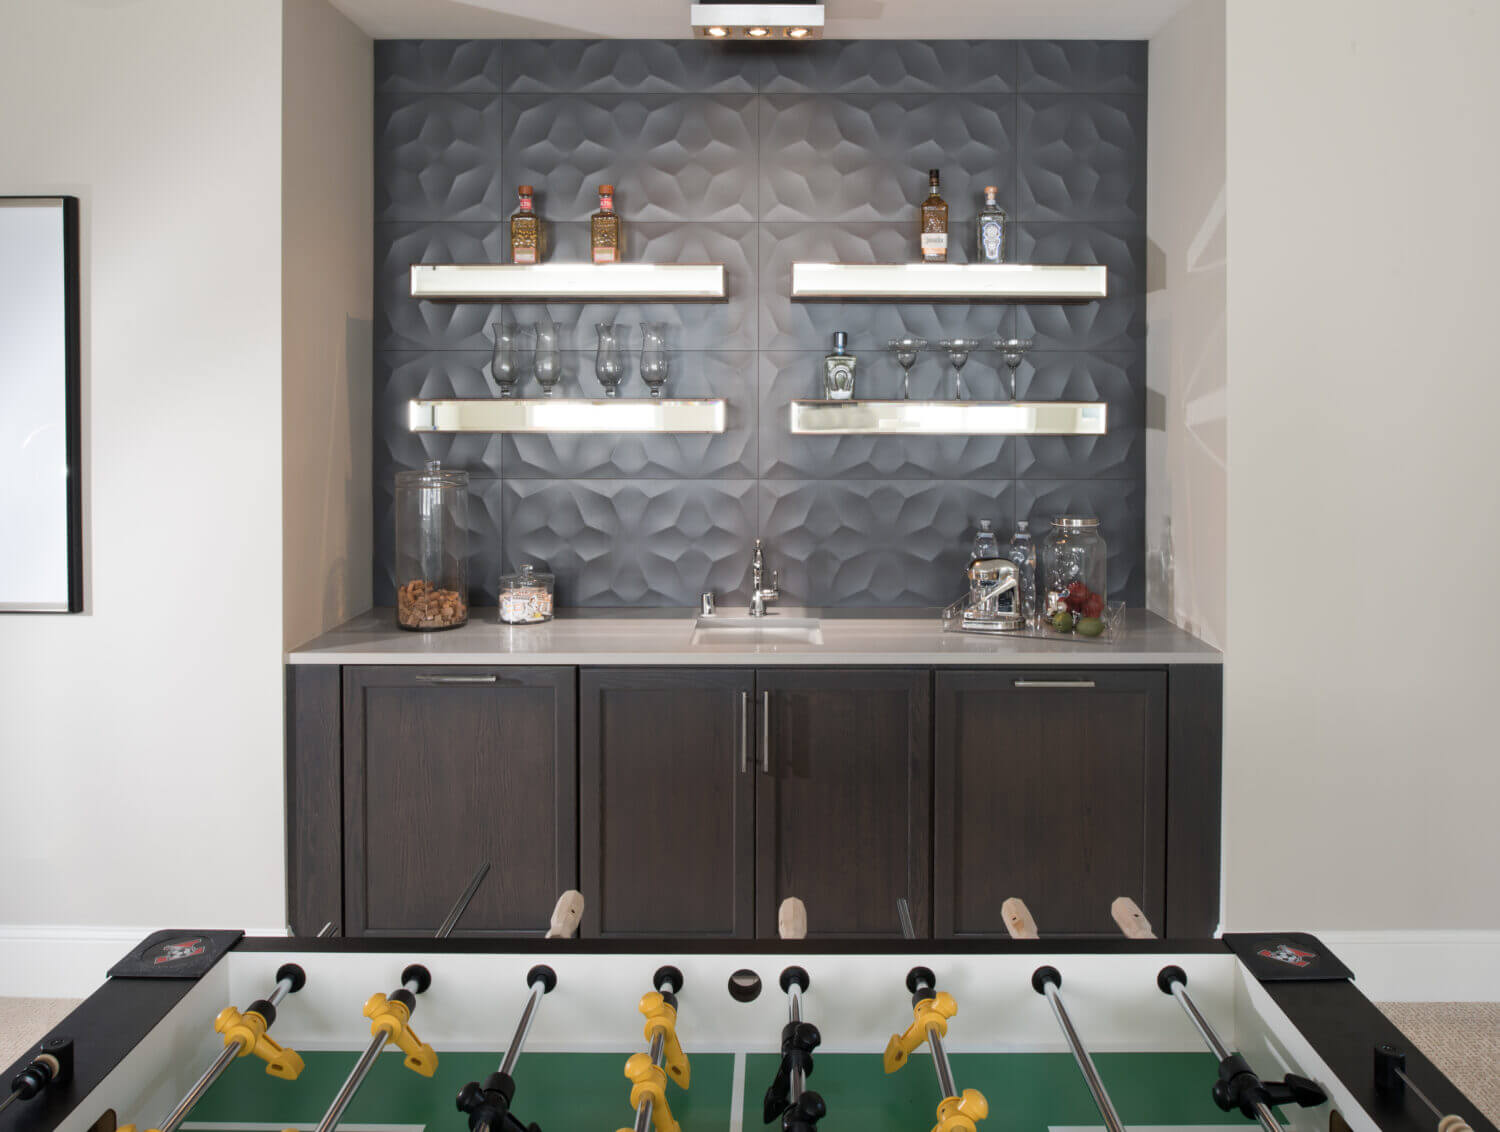 A small nook with dark gray stained cabinets was added in the basement next to the foosball table to store board games, snacks, and supplies for the entertainment room. Stainless steel floating shelves above add space for displaying decor.